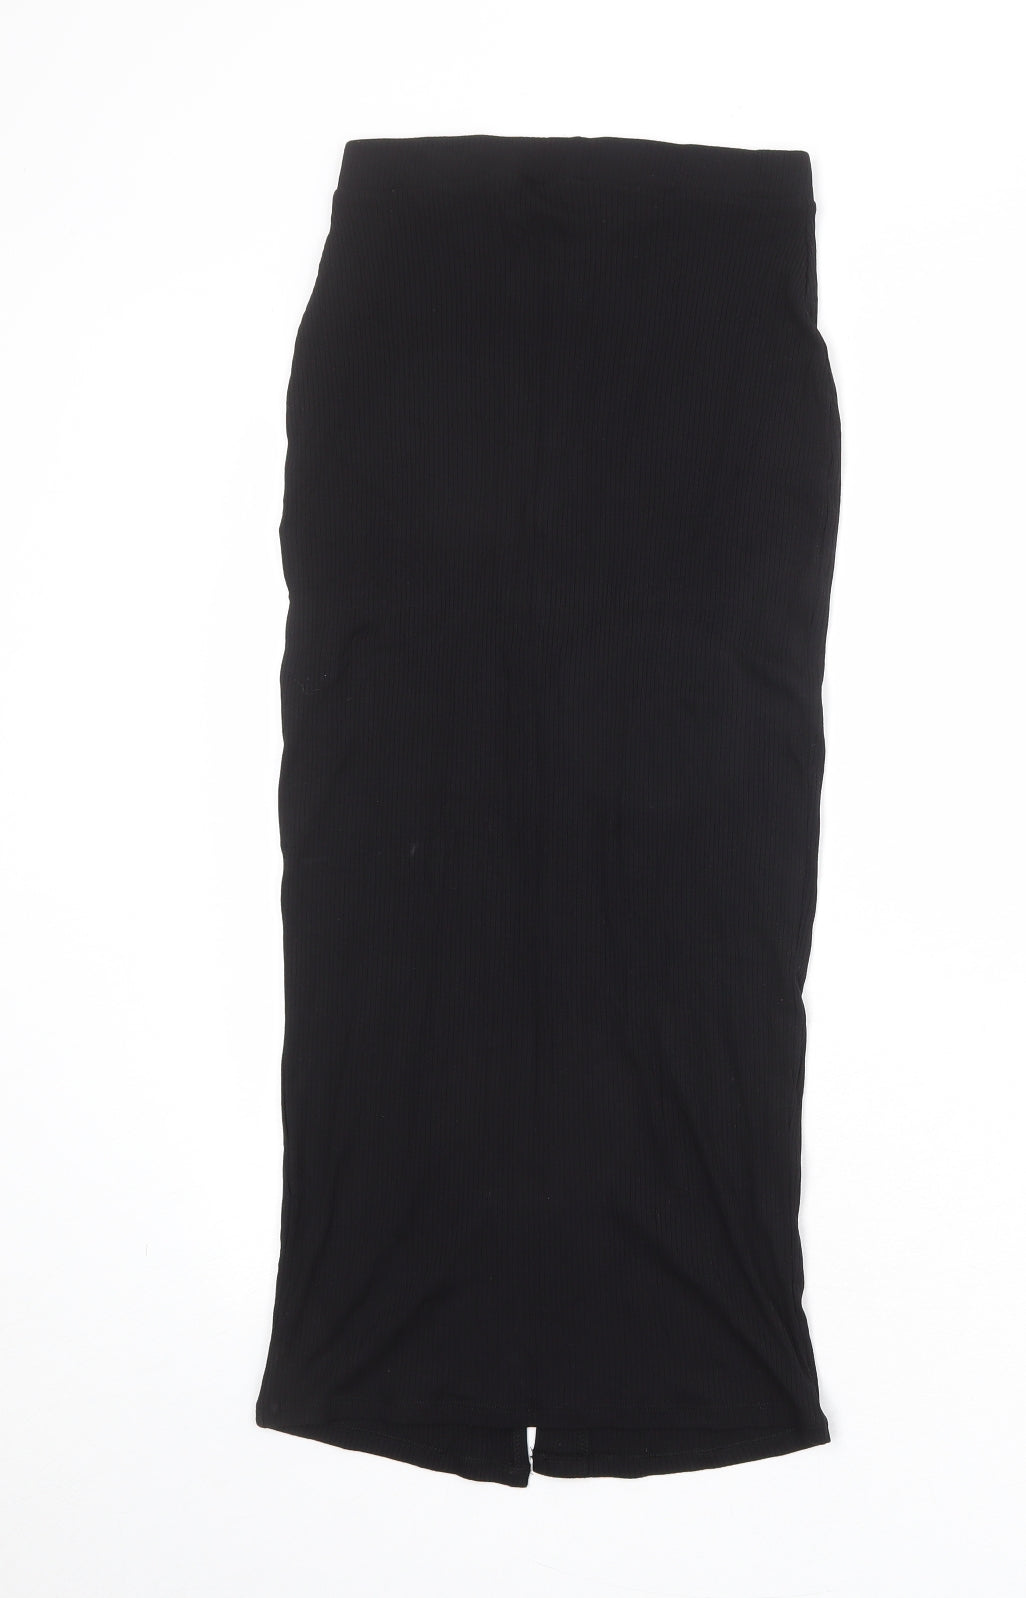 ASOS Womens Black Polyester A-Line Skirt Size 6 Button